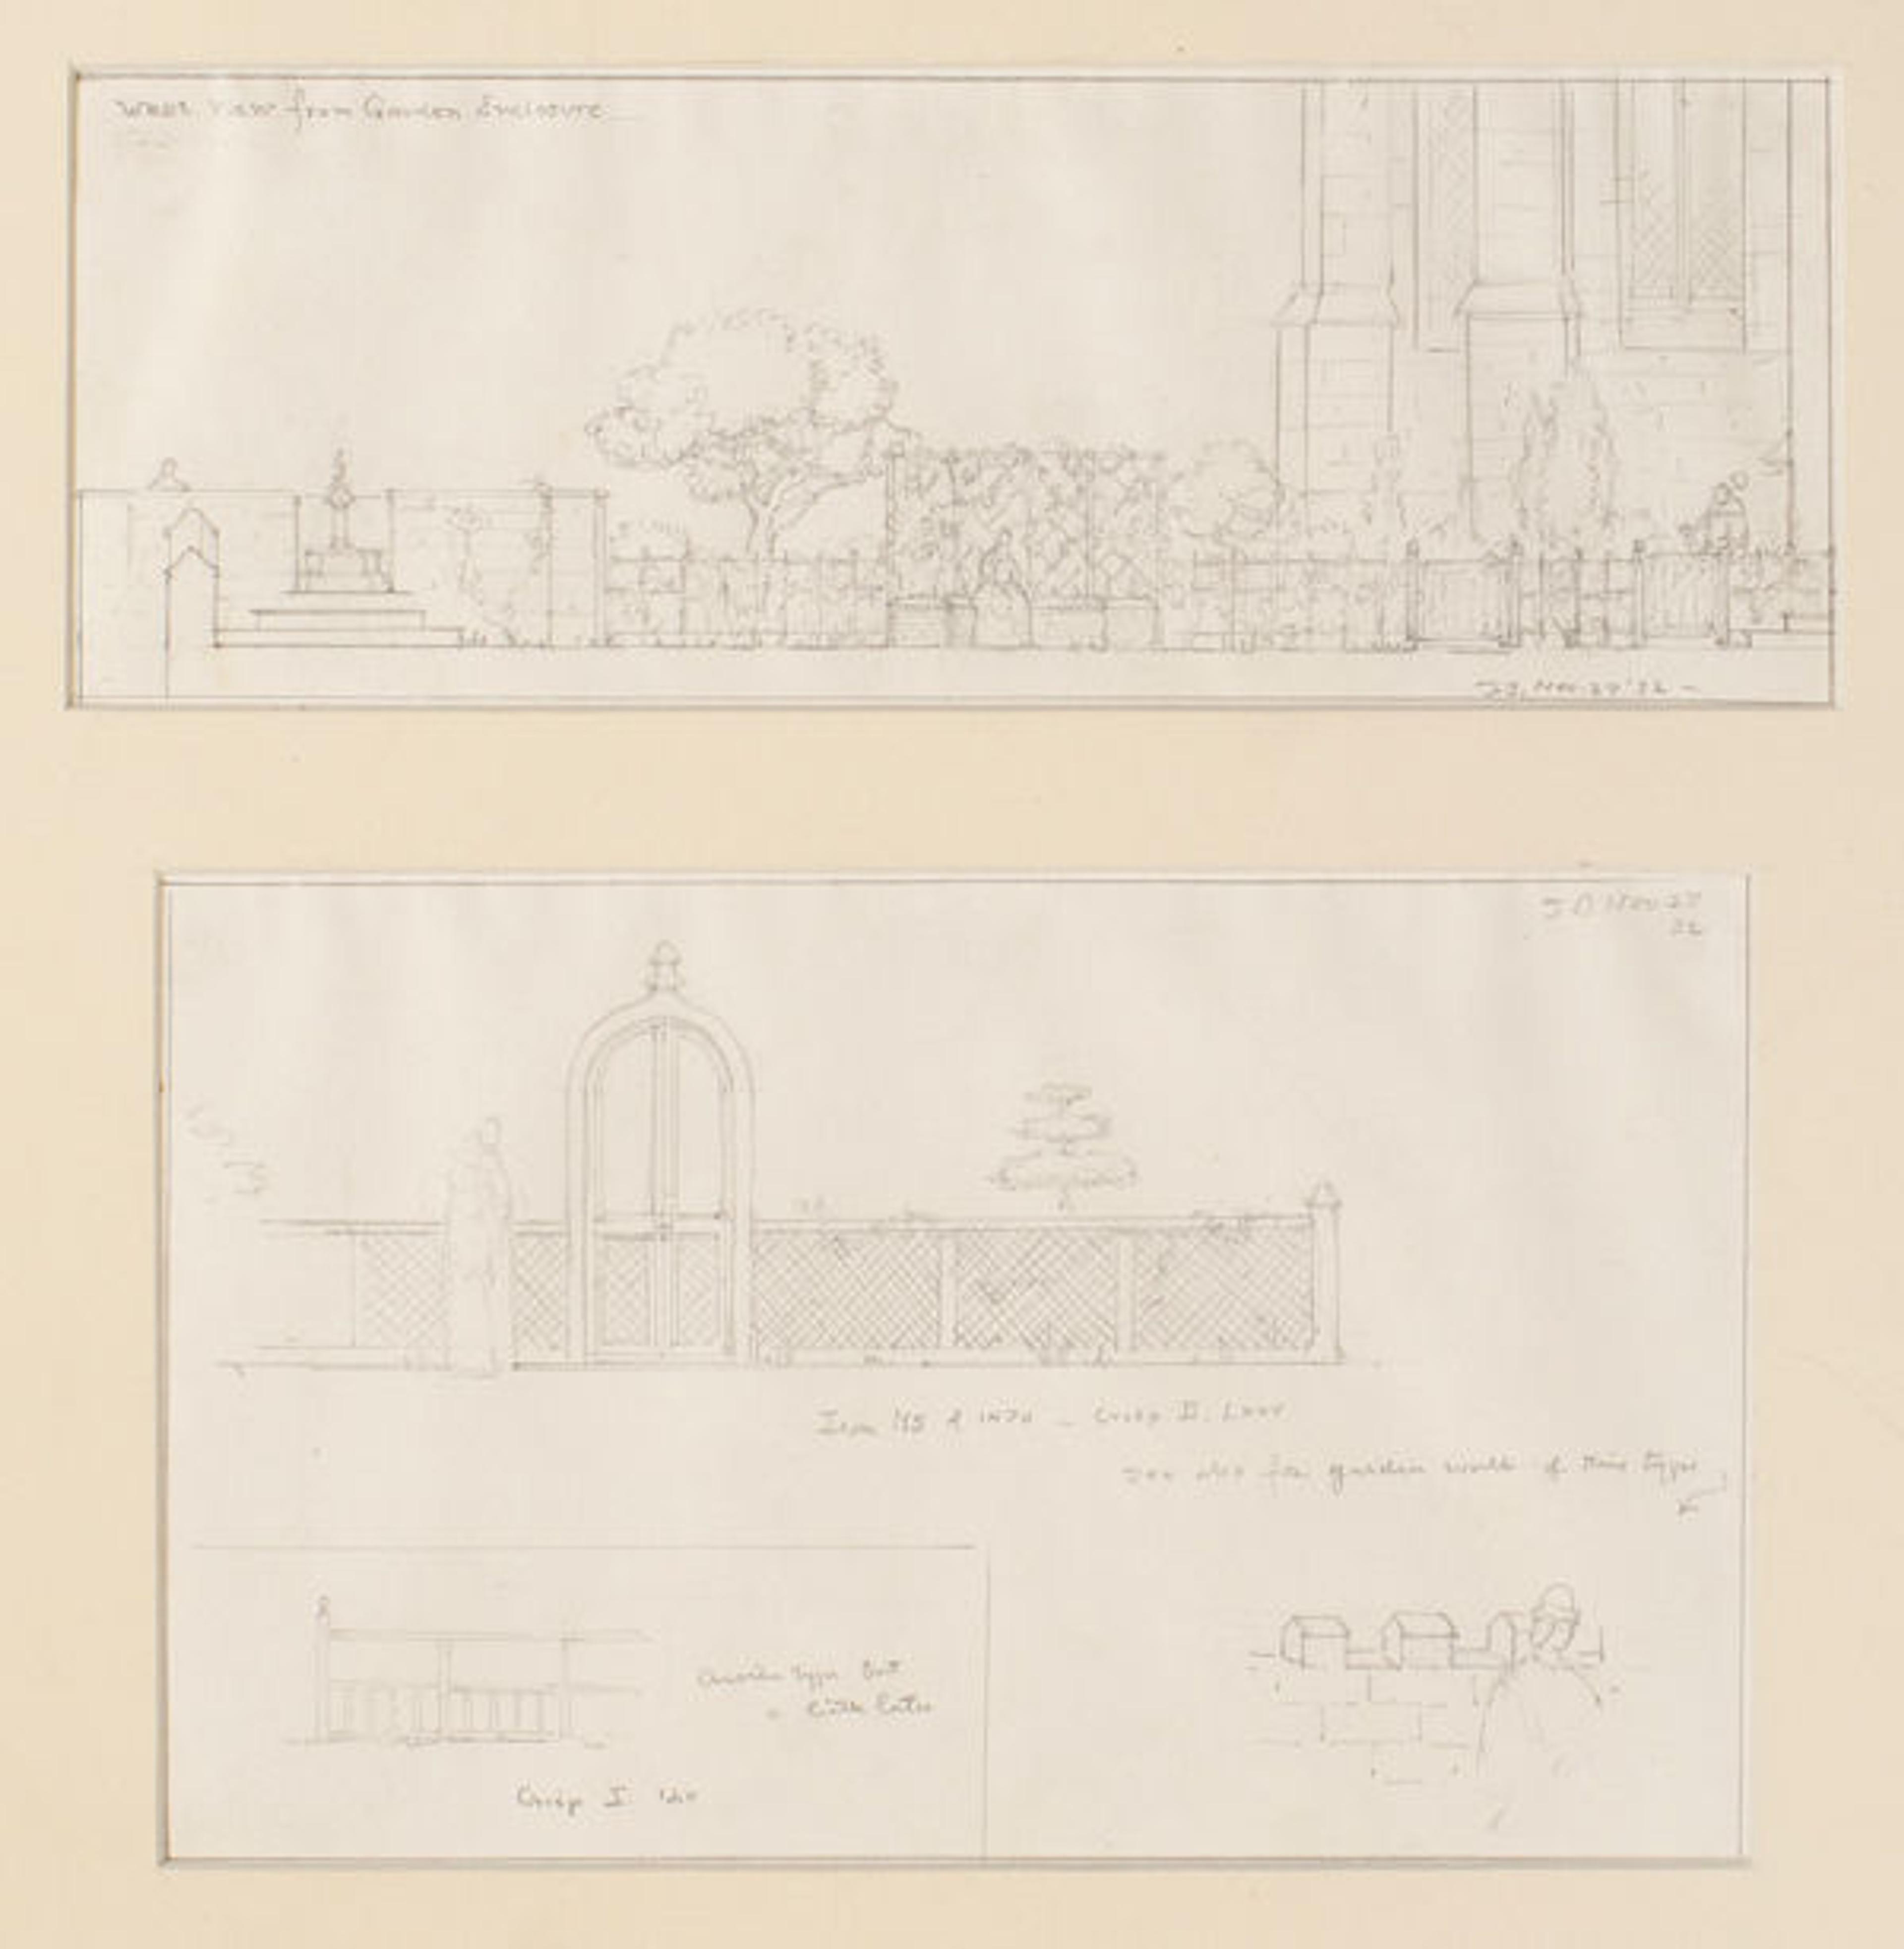 Joseph Breck (1885–1933). Sketches for the west side of the Bonnefont Cloister garden, fence, gate, and wall details, signed 'J.B.' and dated November 27, 1932.